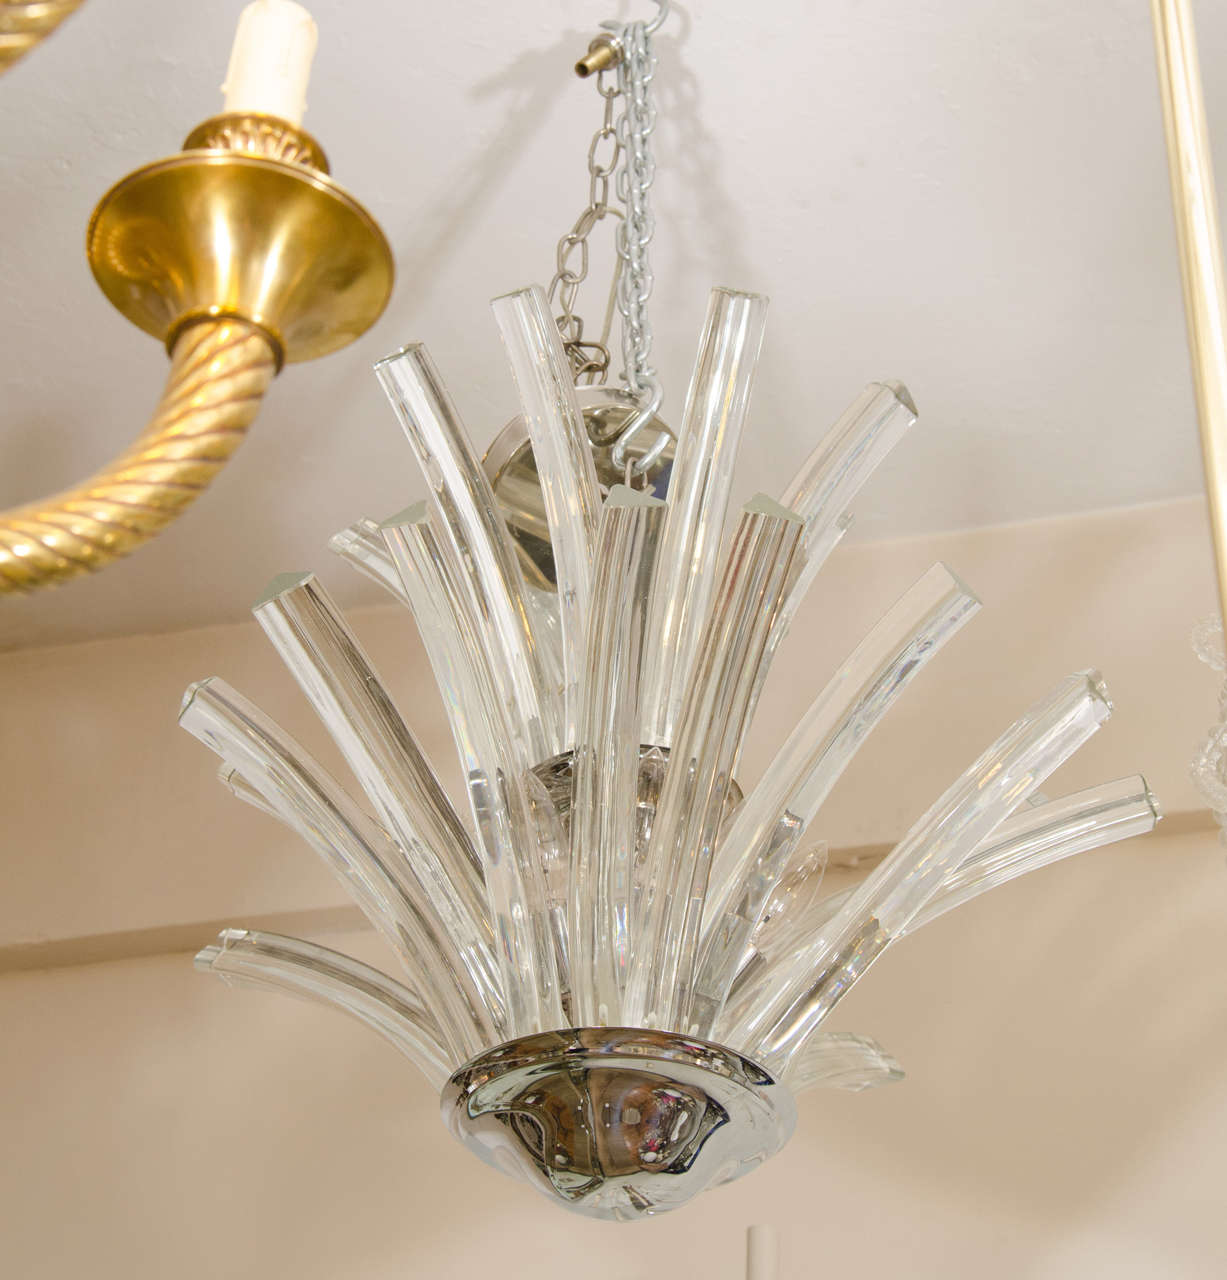 A 20th century two-tier Murano chandelier with tri-pointed curved glass rods. This chandelier takes nine candelabra base bulbs.